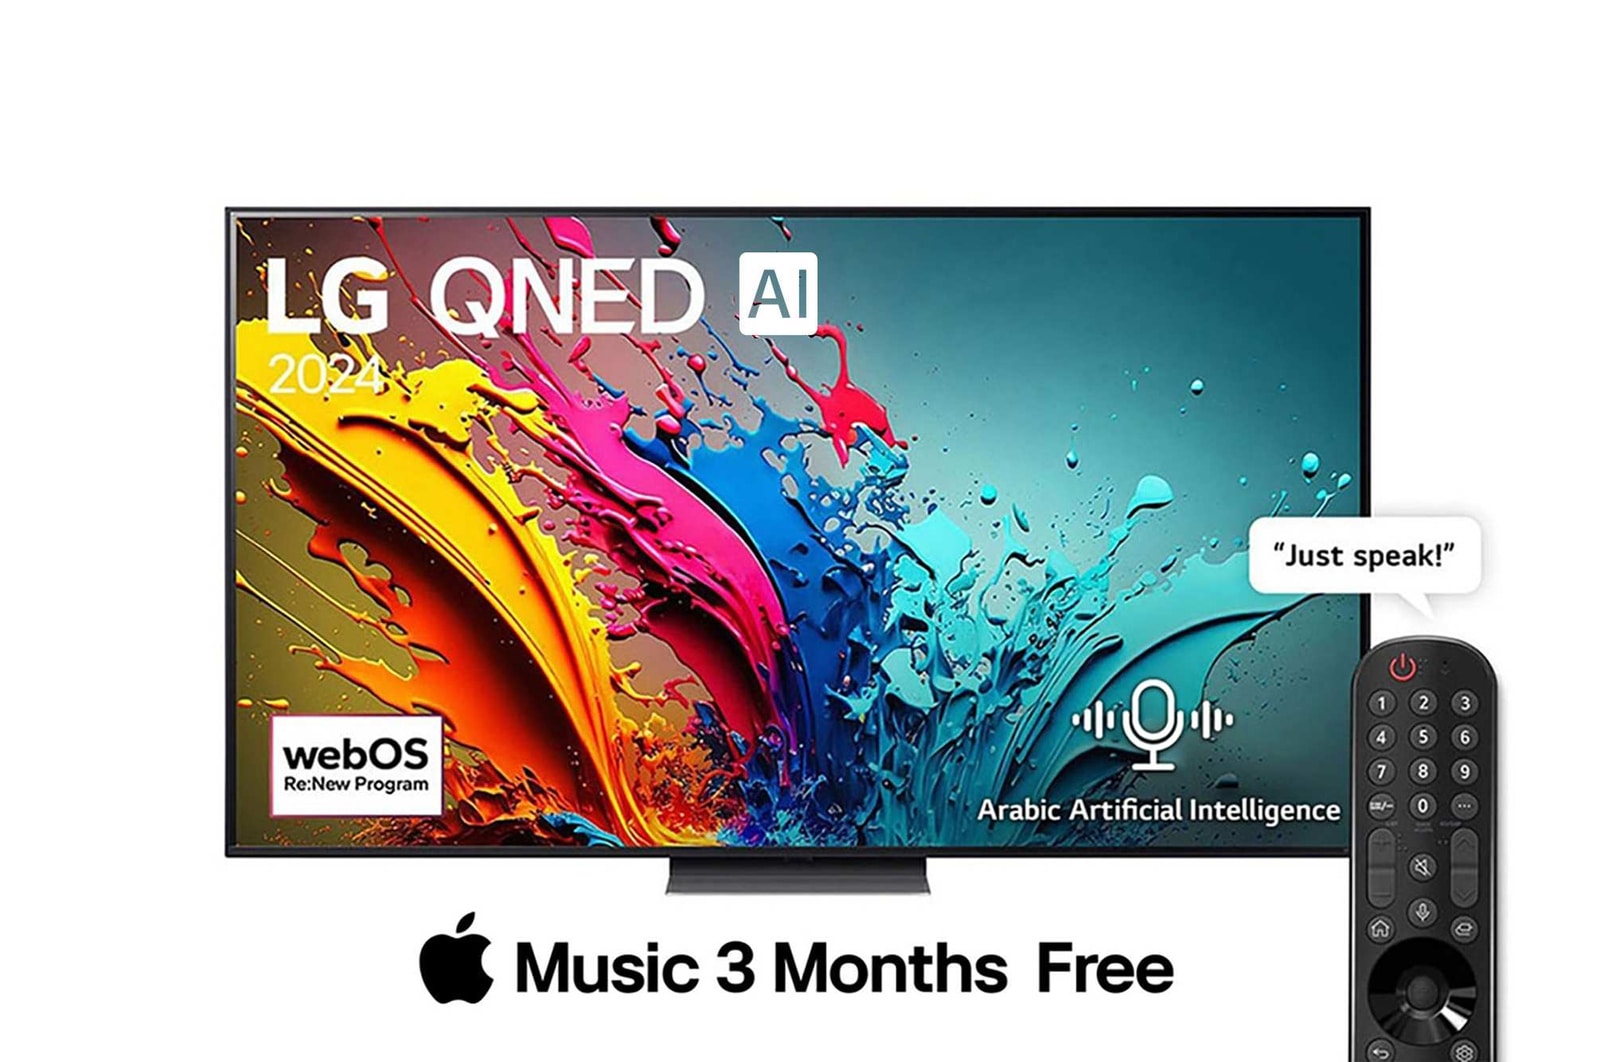 Front view of LG QNED TV, QNED86 with text of LG QNED, 2024, and webOS Re:New Program logo on screen